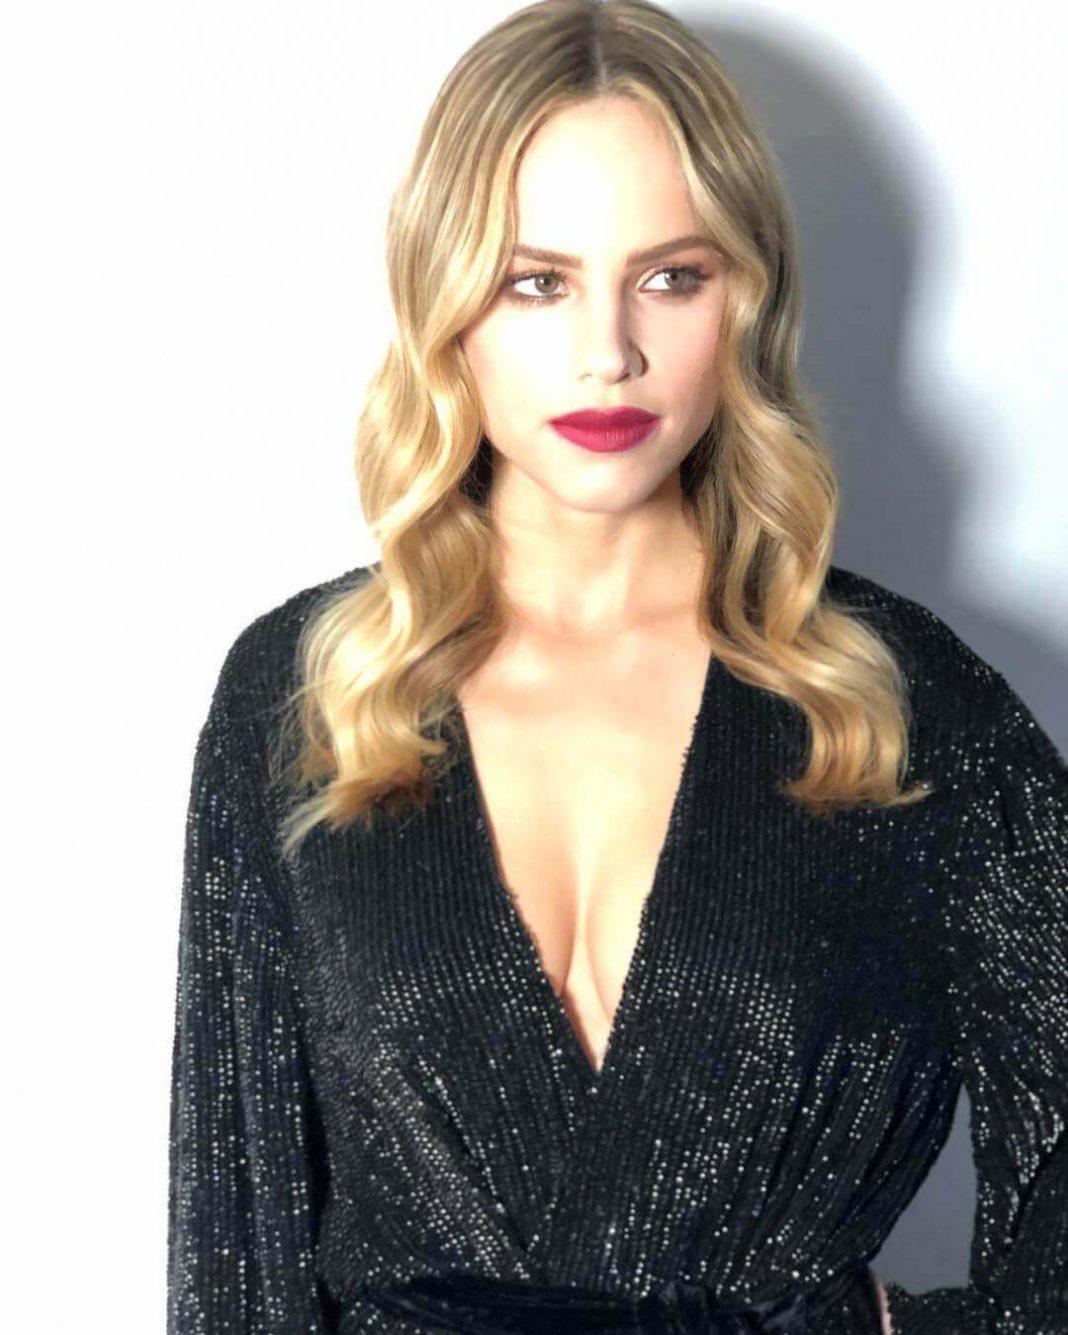 49 Halston Sage Nude Pictures Which Prove Beauty Beyond Recognition 76